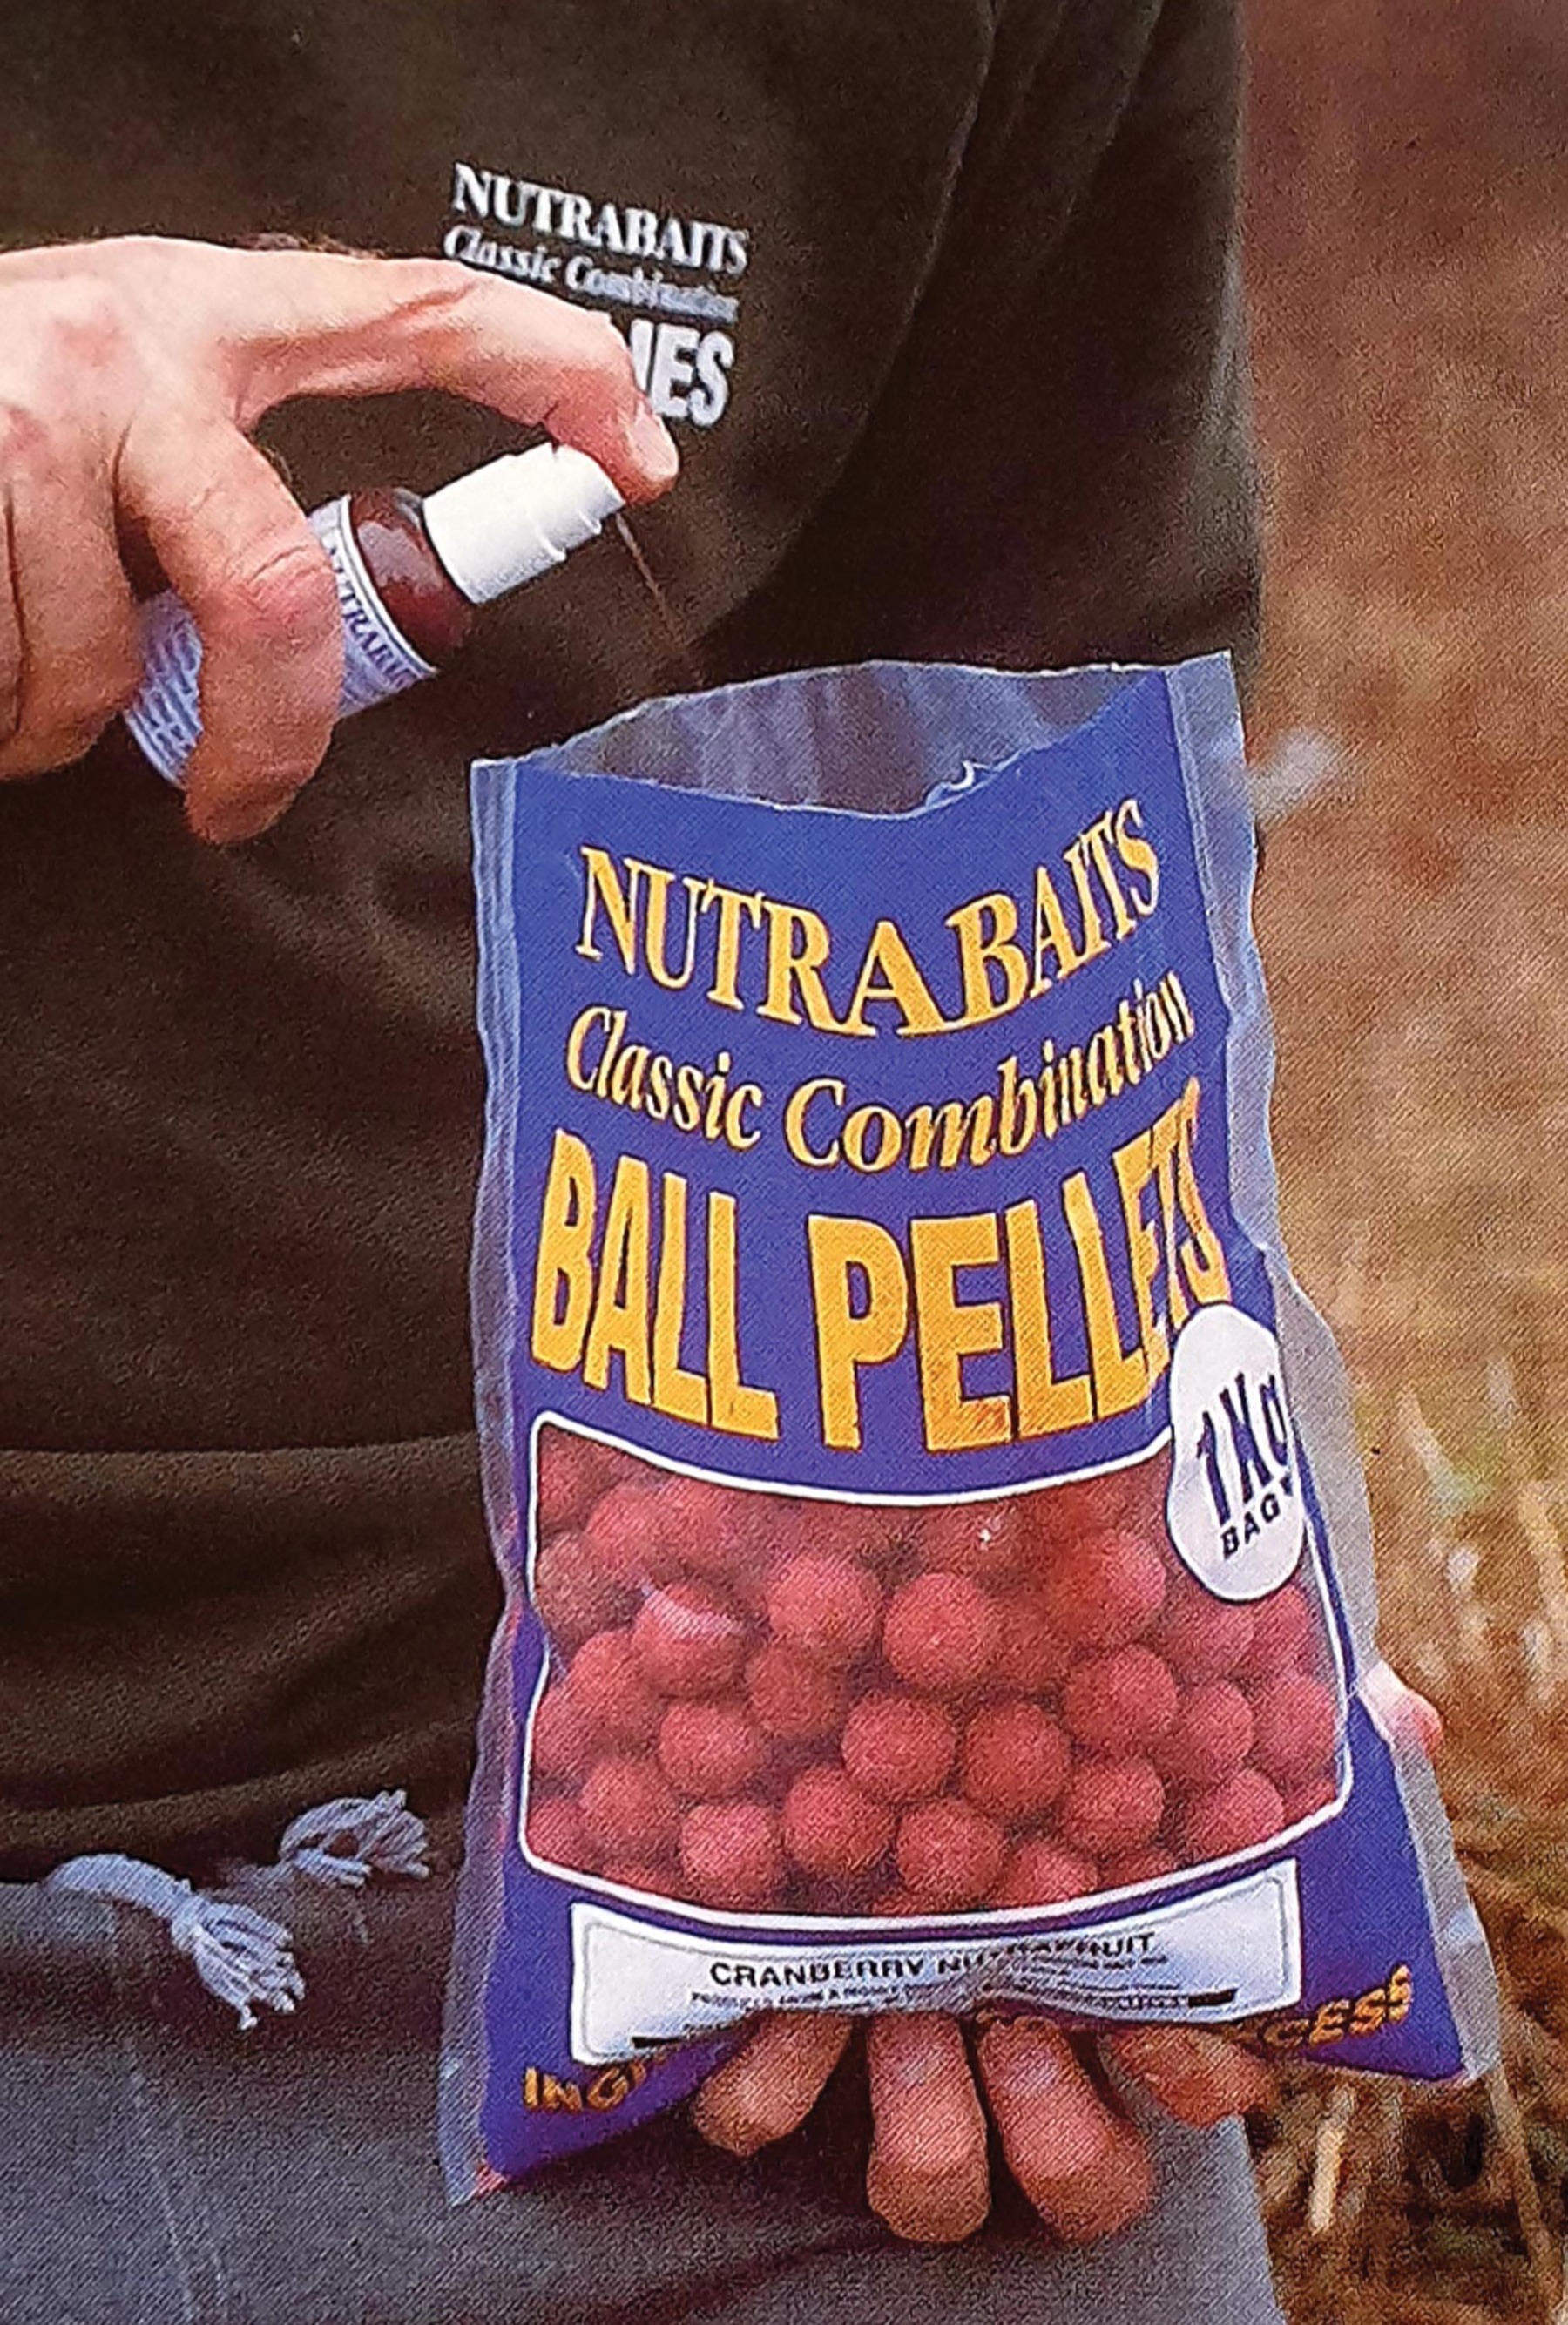 





 



I was a big fan of ball pellets when Nutrabaits brought them out in 1997